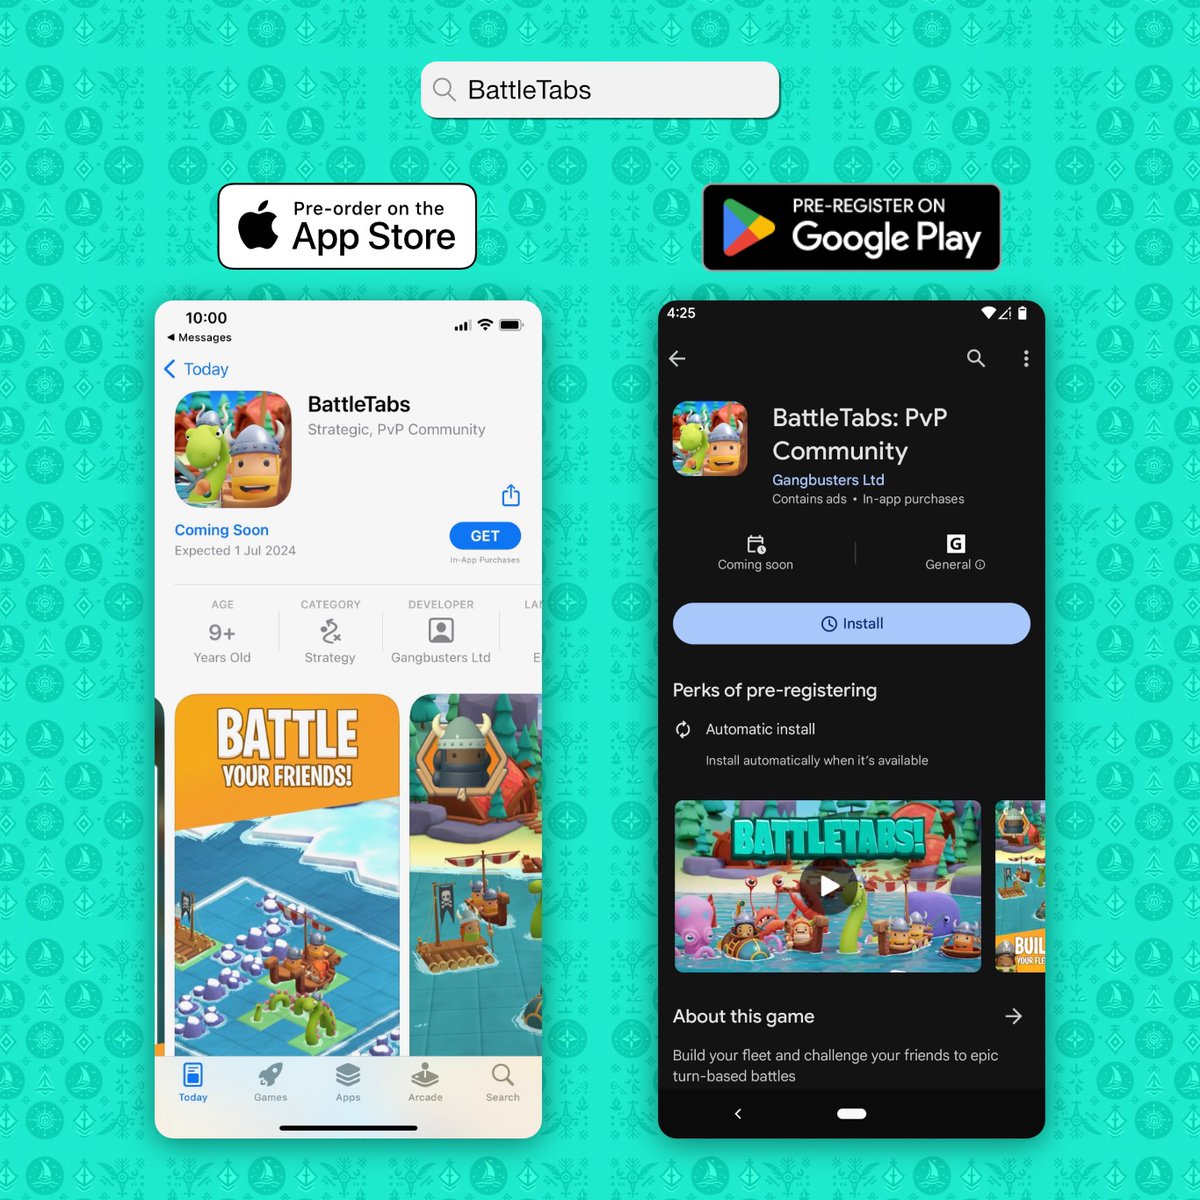 📲Pre-order for BattleTabs is now live! Sign up to have the game instantly ready to play on your phone when we launch!

🍎[iOS] App Store: apps.apple.com/us/app/battlet…

🤖[Android] Google Play: play.google.com/store/apps/det…

Target release by the end of June!

#gamedev #mobilegaming